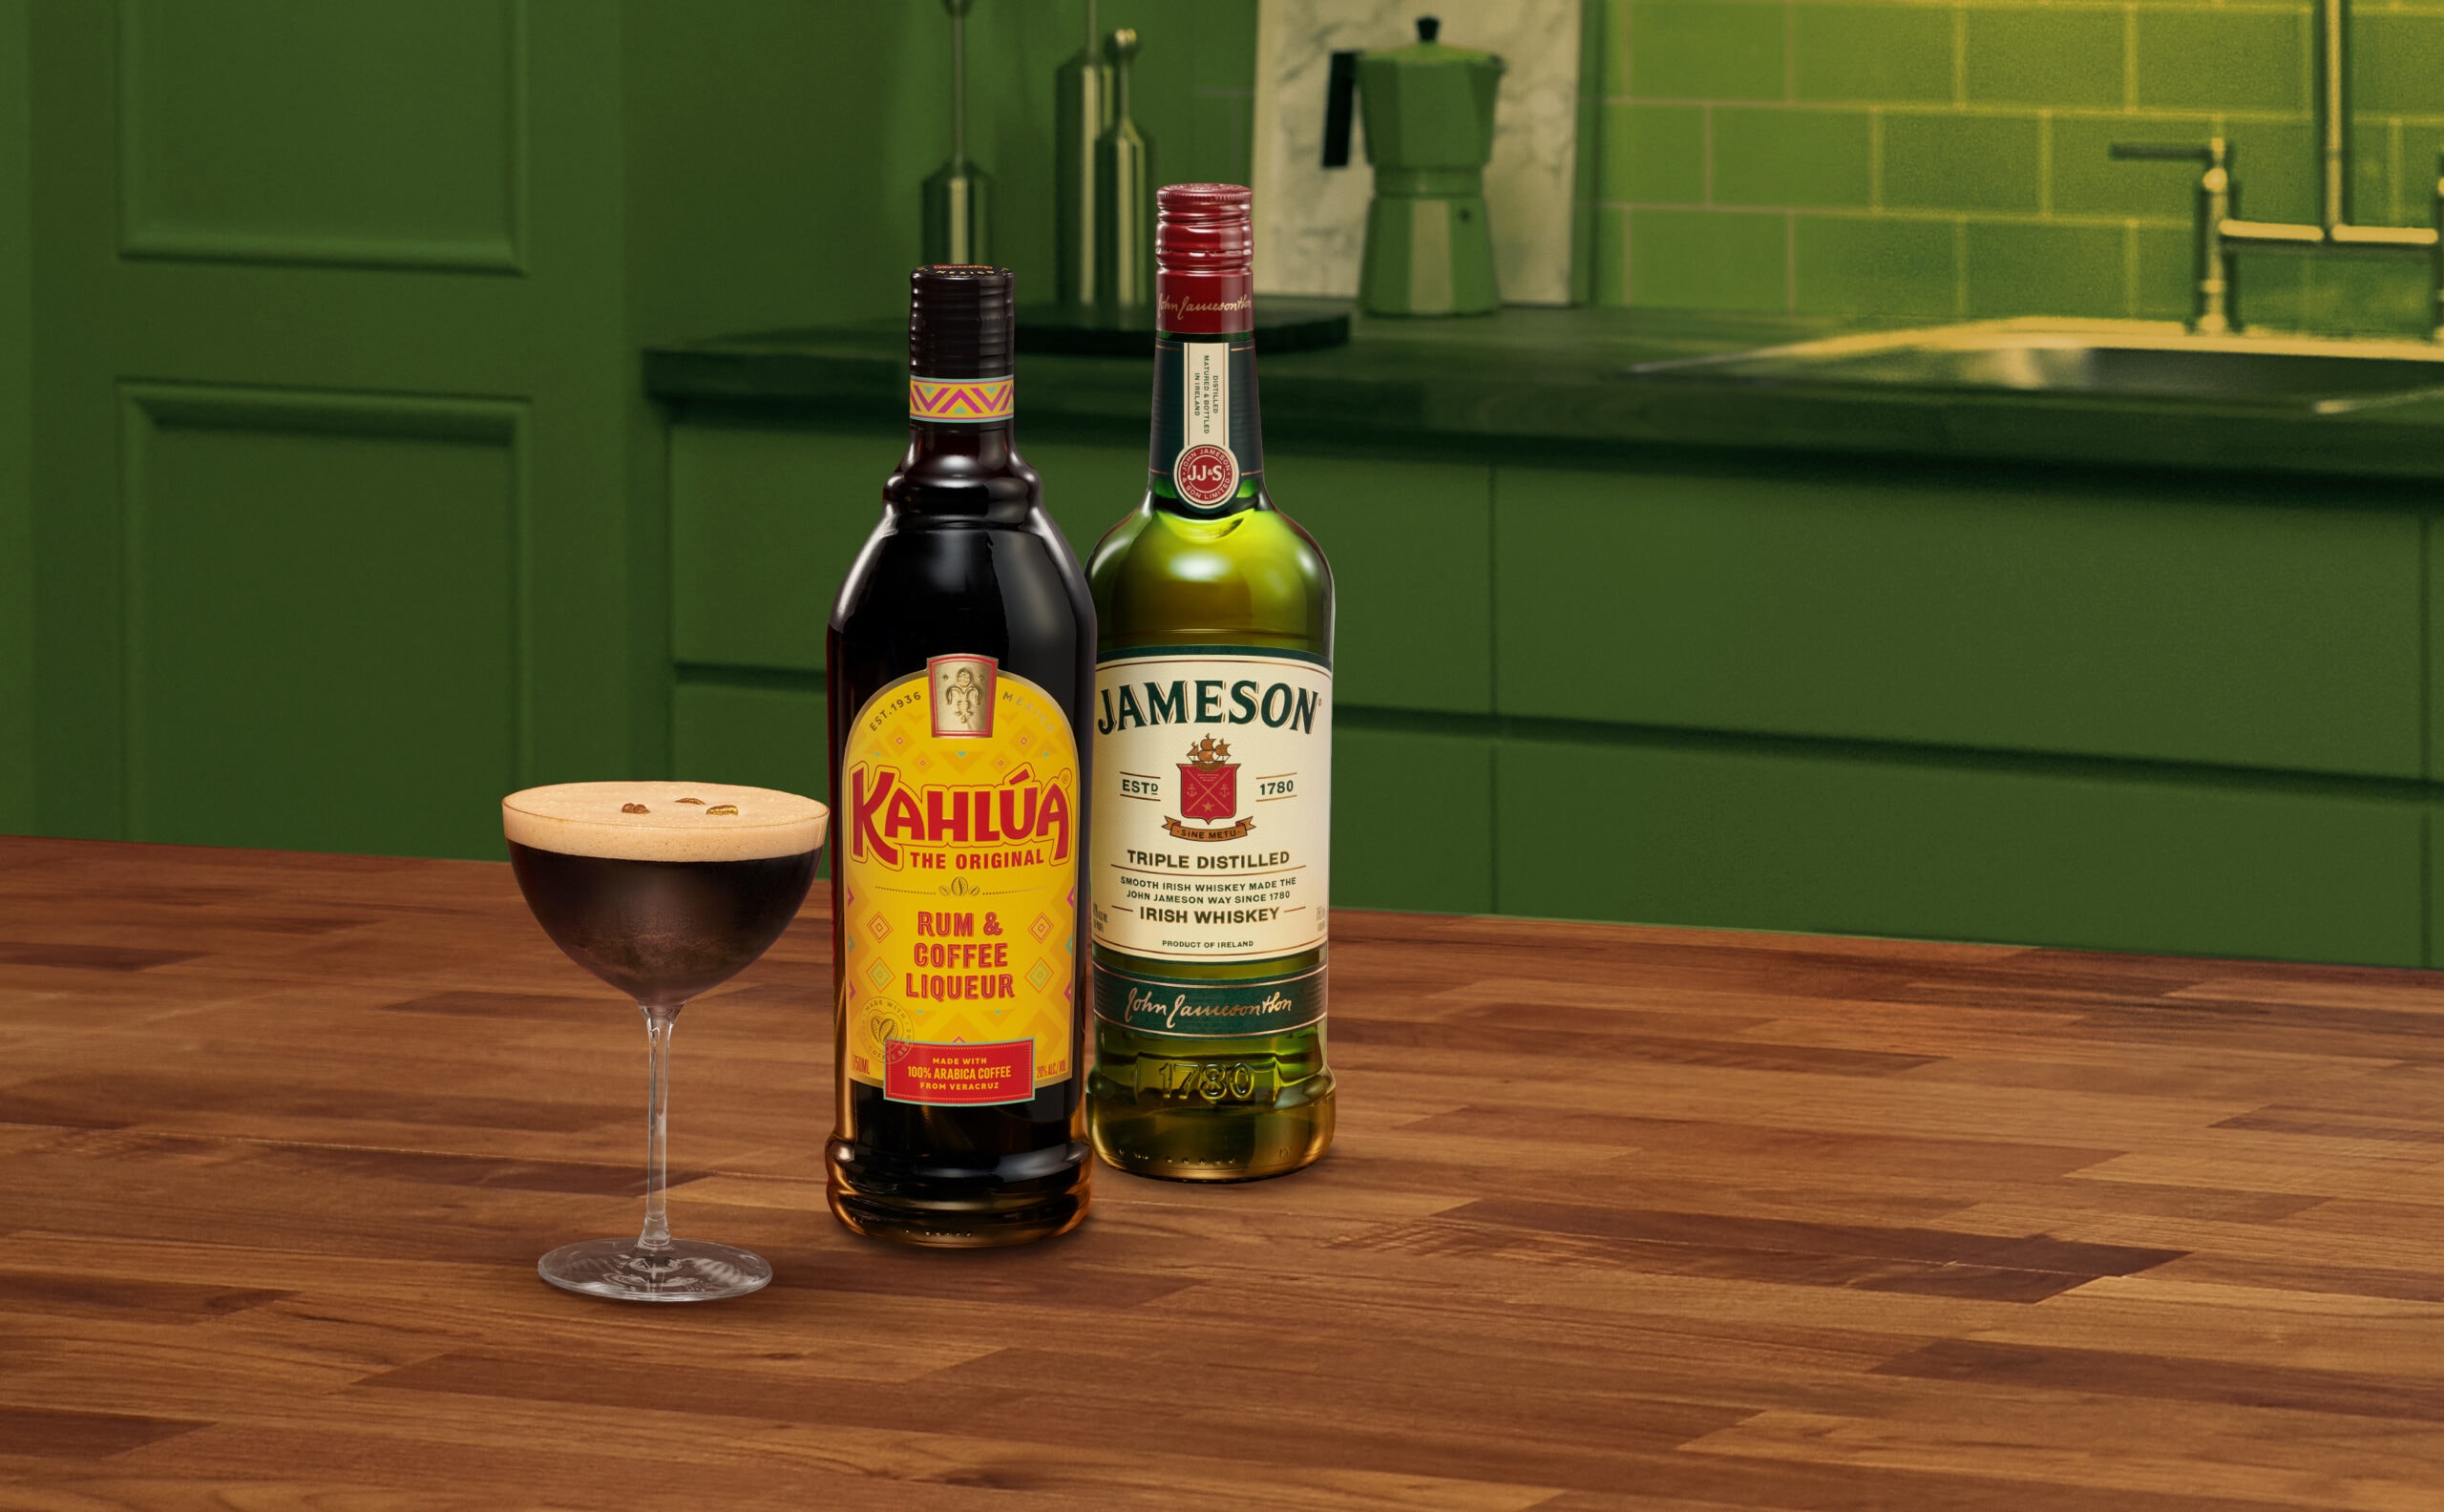 bottle of Kahlua and Jameson with espresso martini